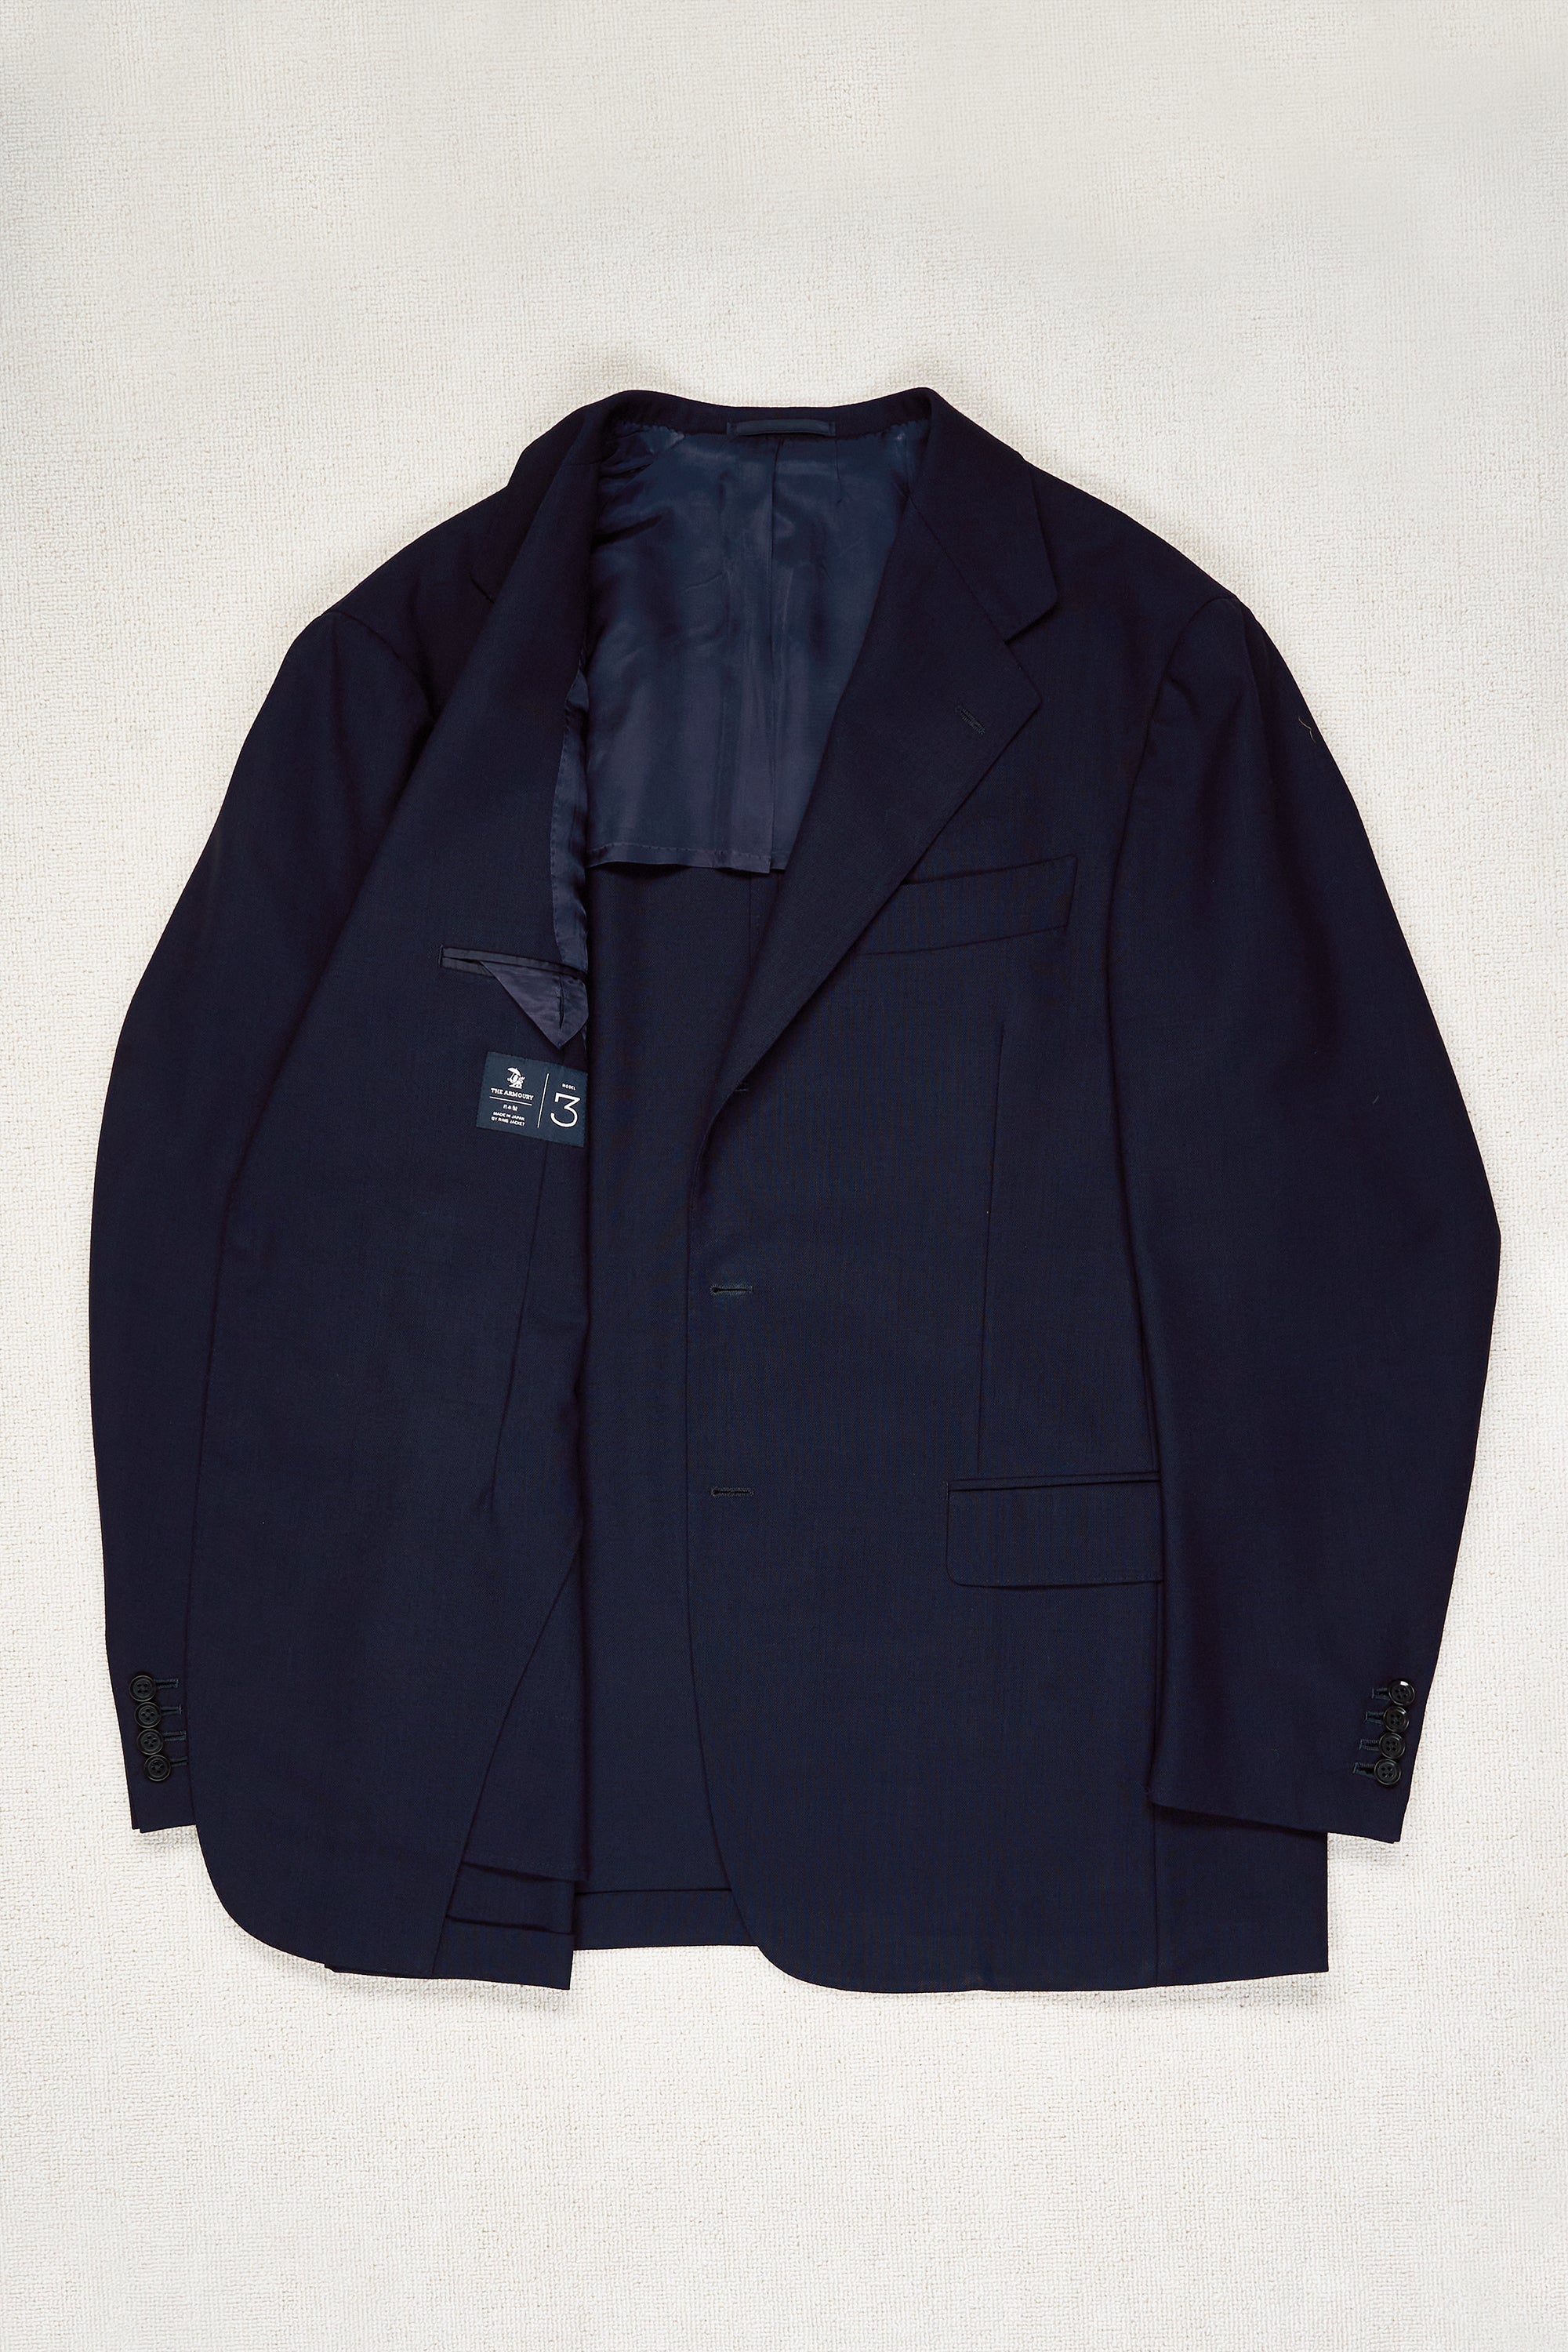 The Armoury by Ring Jacket Model 3 Navy 4-ply Wool Suit